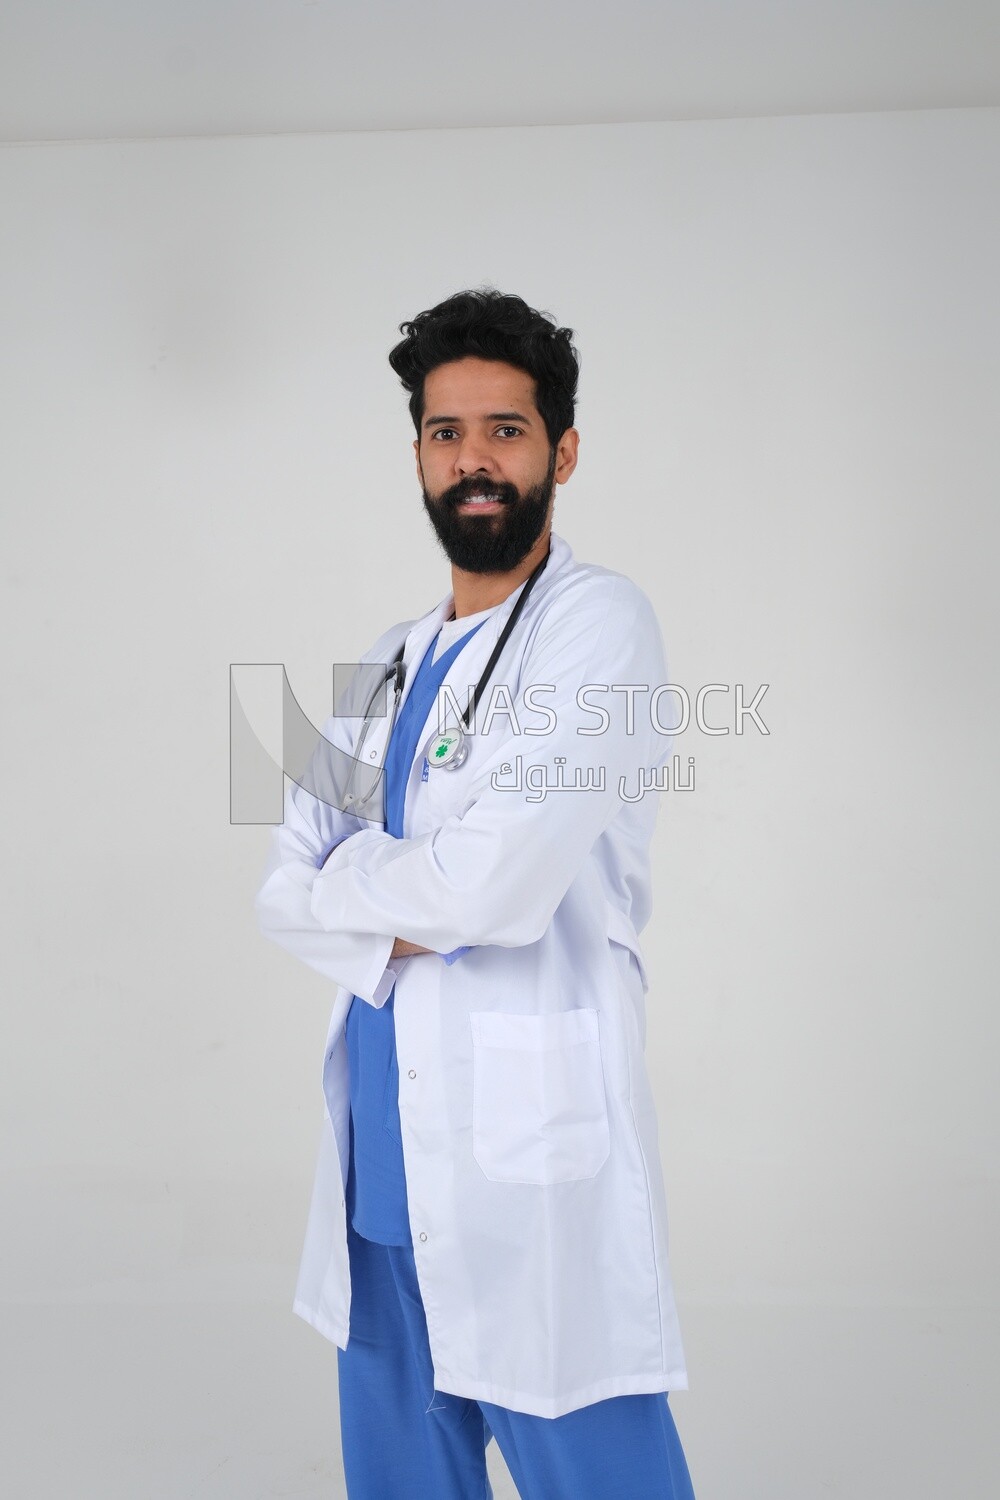 Saudi man wearing a medical coat and a stethoscope, white background, medicine and health care, Saudi model